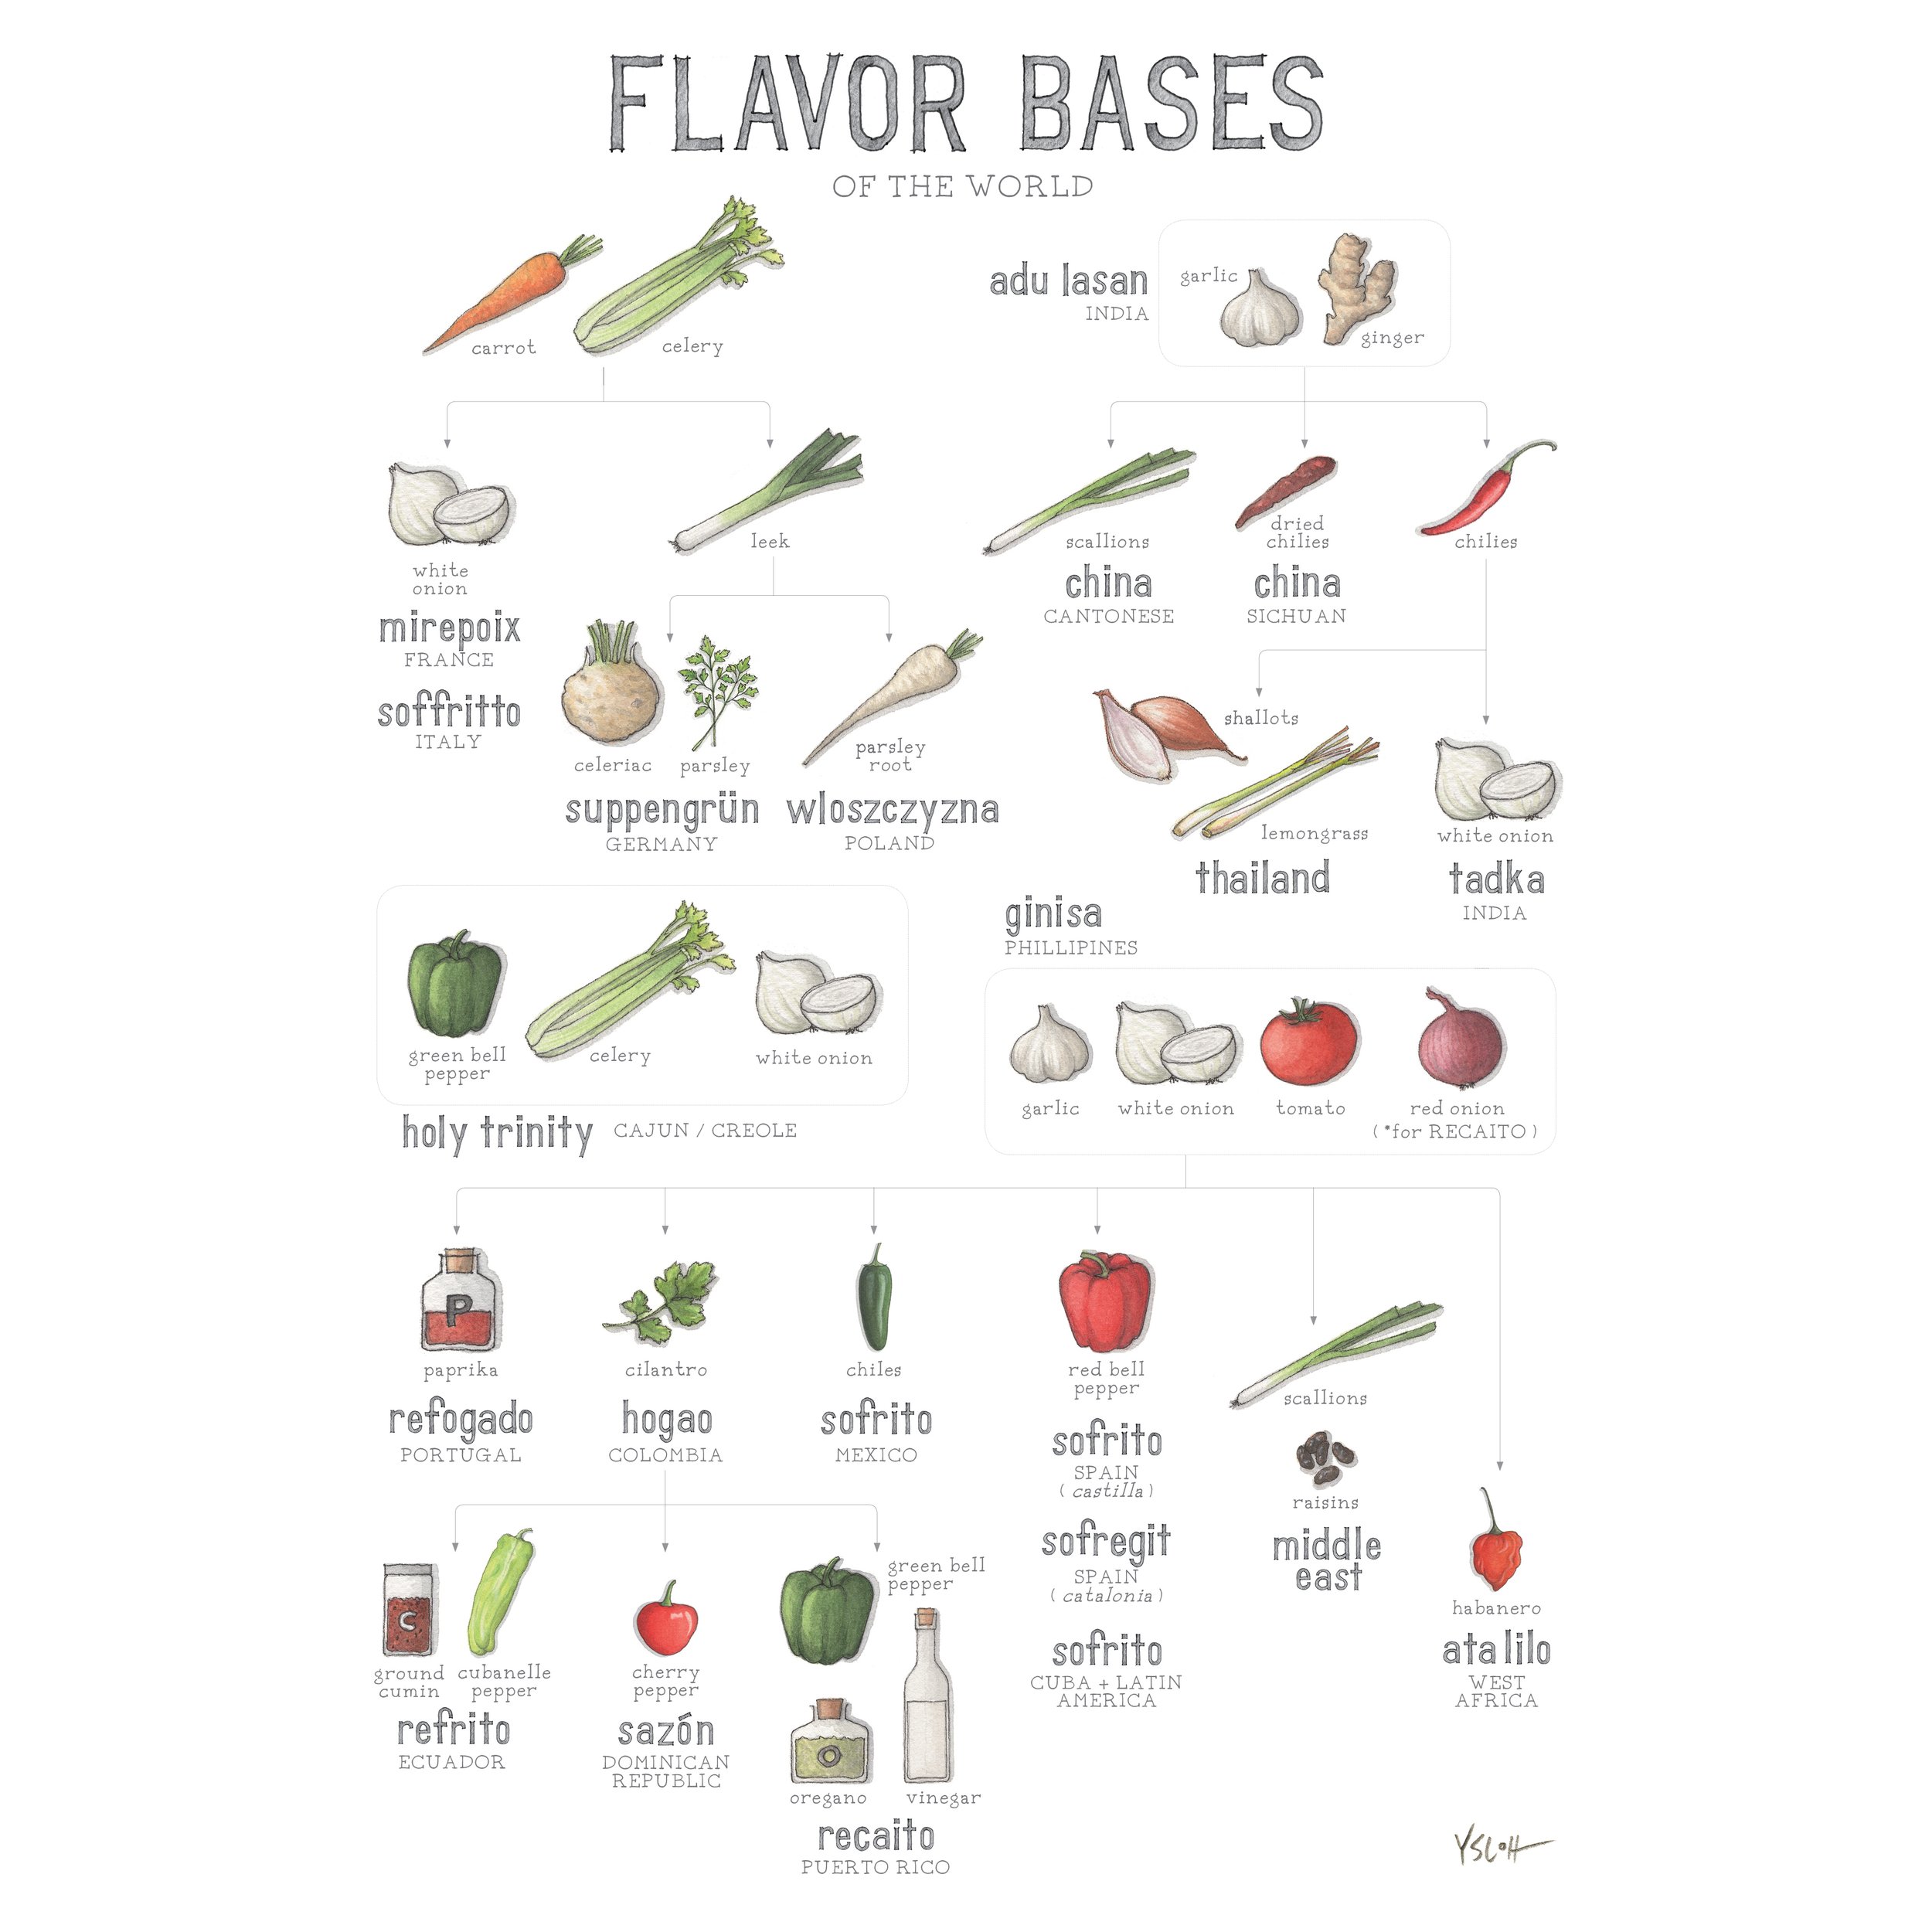 Flavor Bases of the World